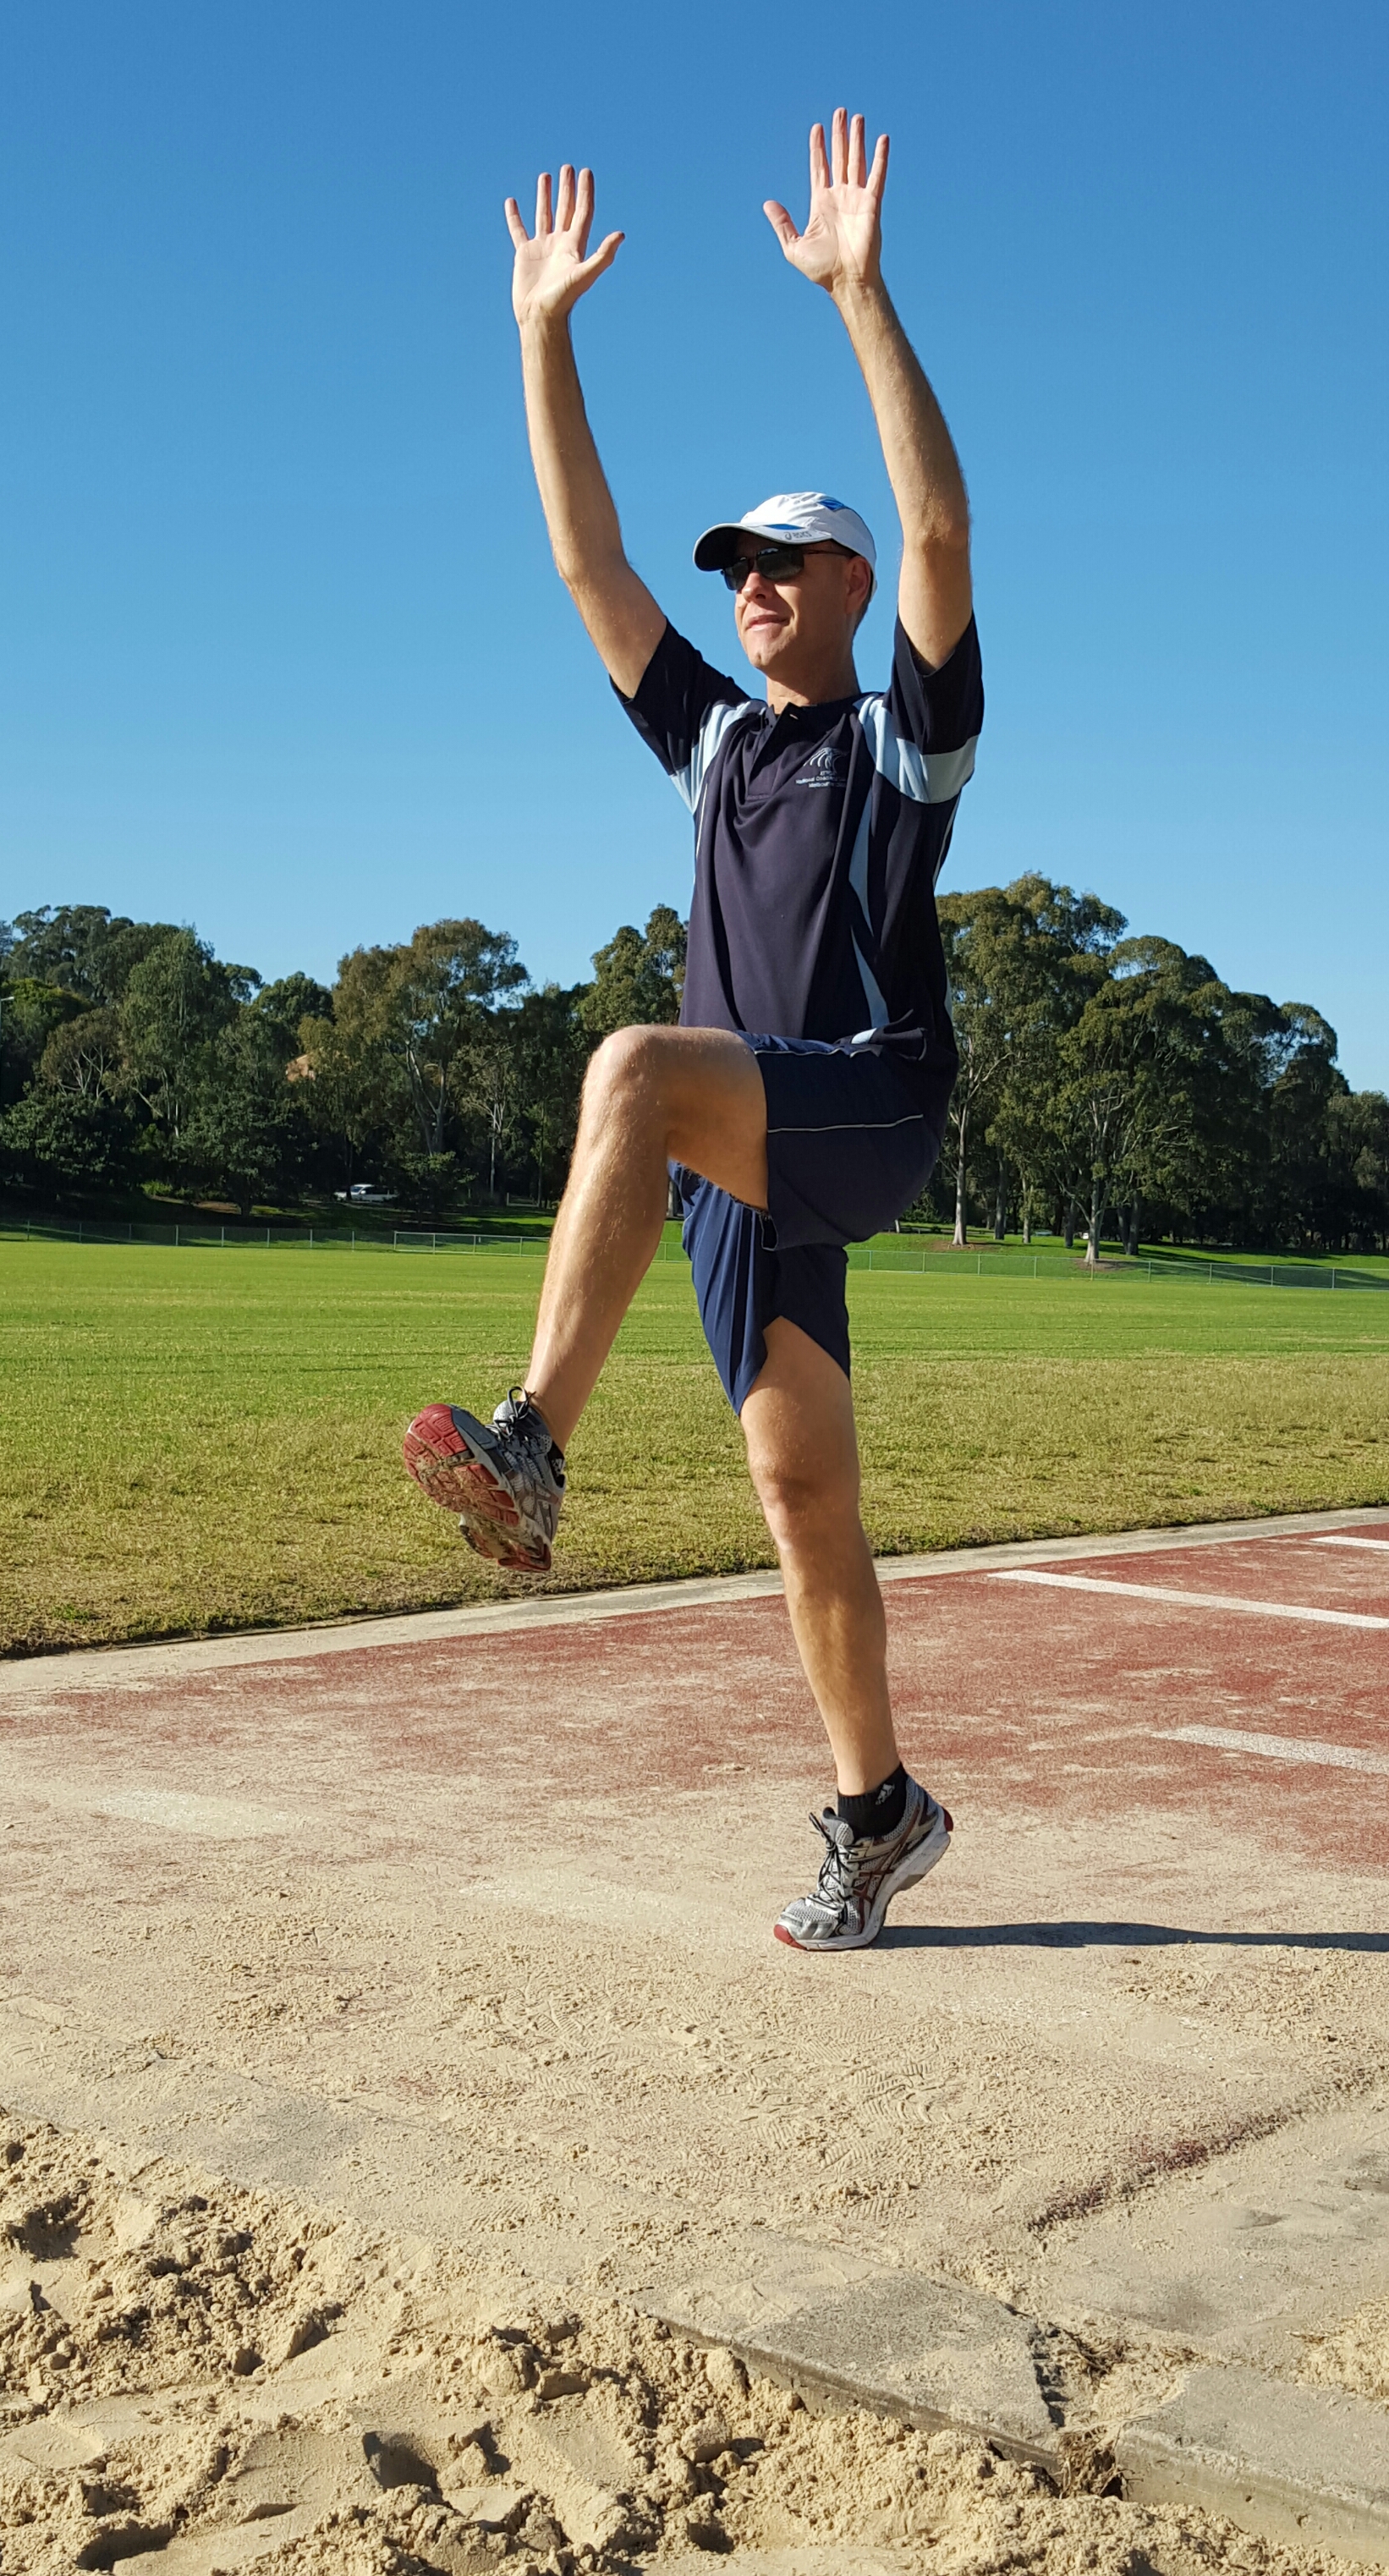 An image demonstrating a long jump take-off position with arms extended above the head.